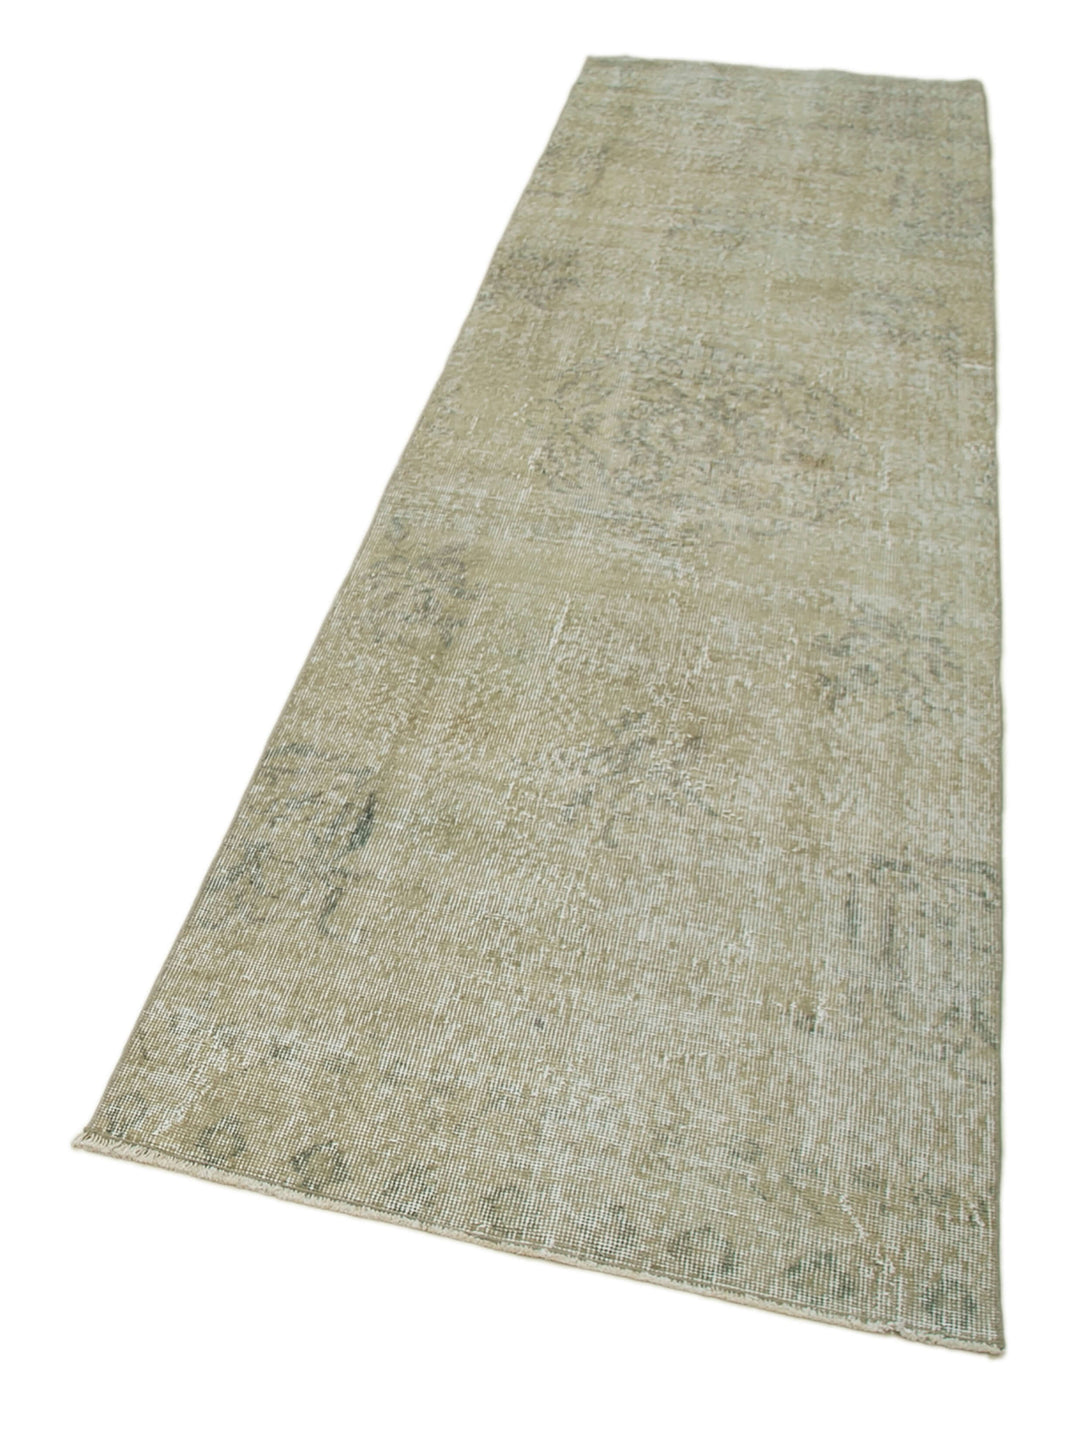 Handmade Overdyed Runner > Design# OL-AC-34213 > Size: 2'-7" x 9'-4", Carpet Culture Rugs, Handmade Rugs, NYC Rugs, New Rugs, Shop Rugs, Rug Store, Outlet Rugs, SoHo Rugs, Rugs in USA